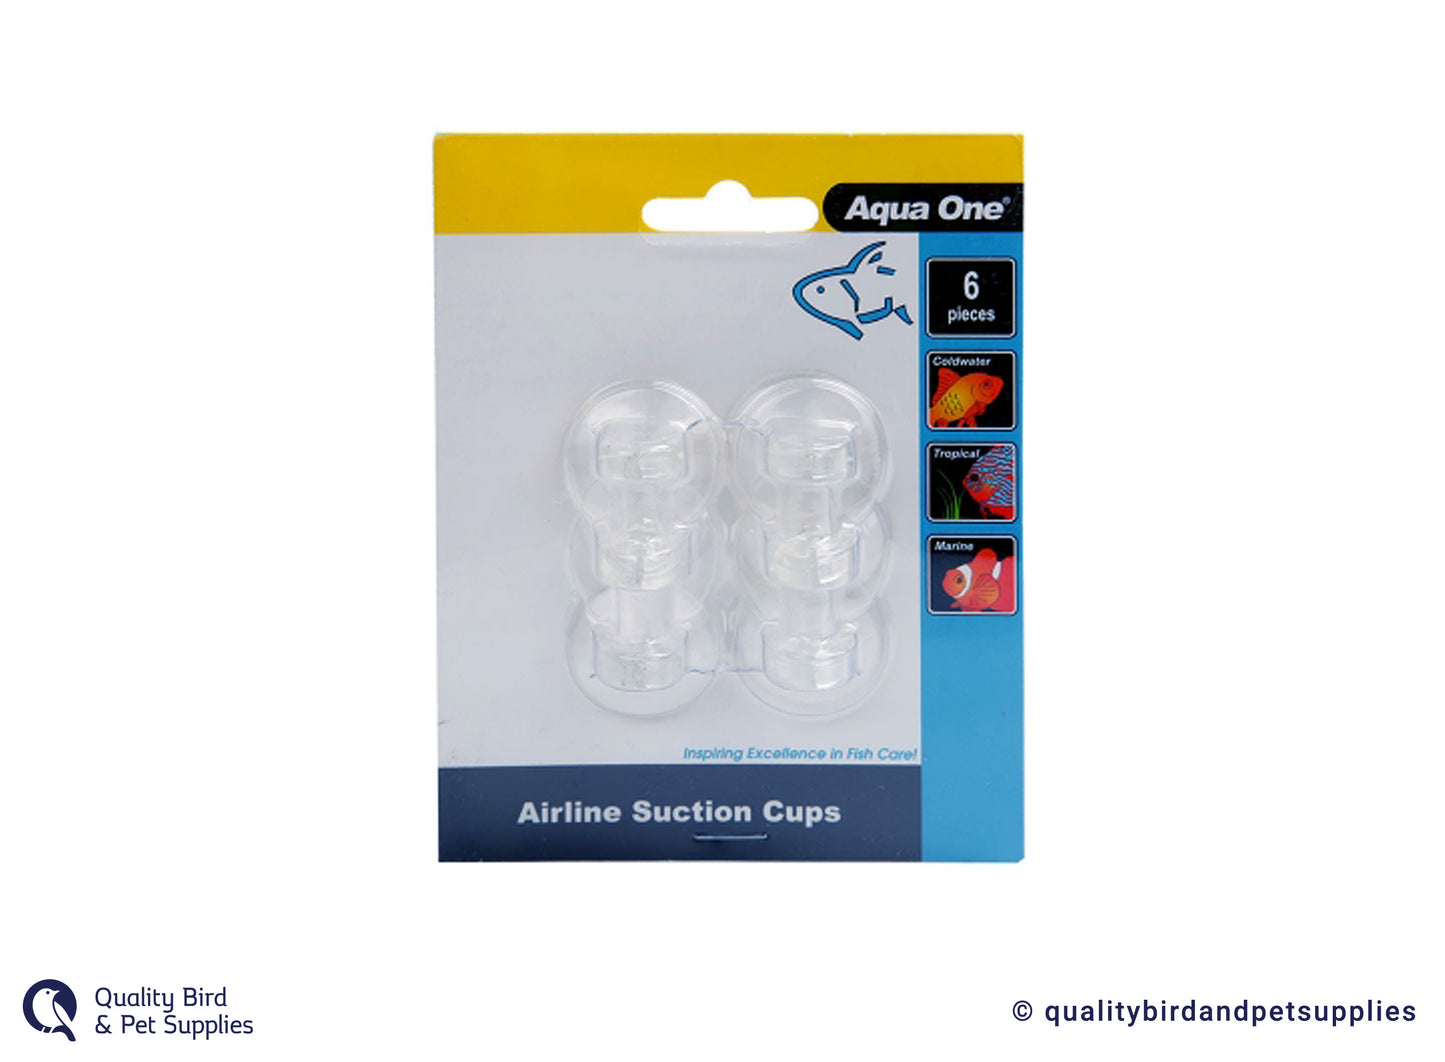 Aqua One Air Line Suction Cups - 6 pack